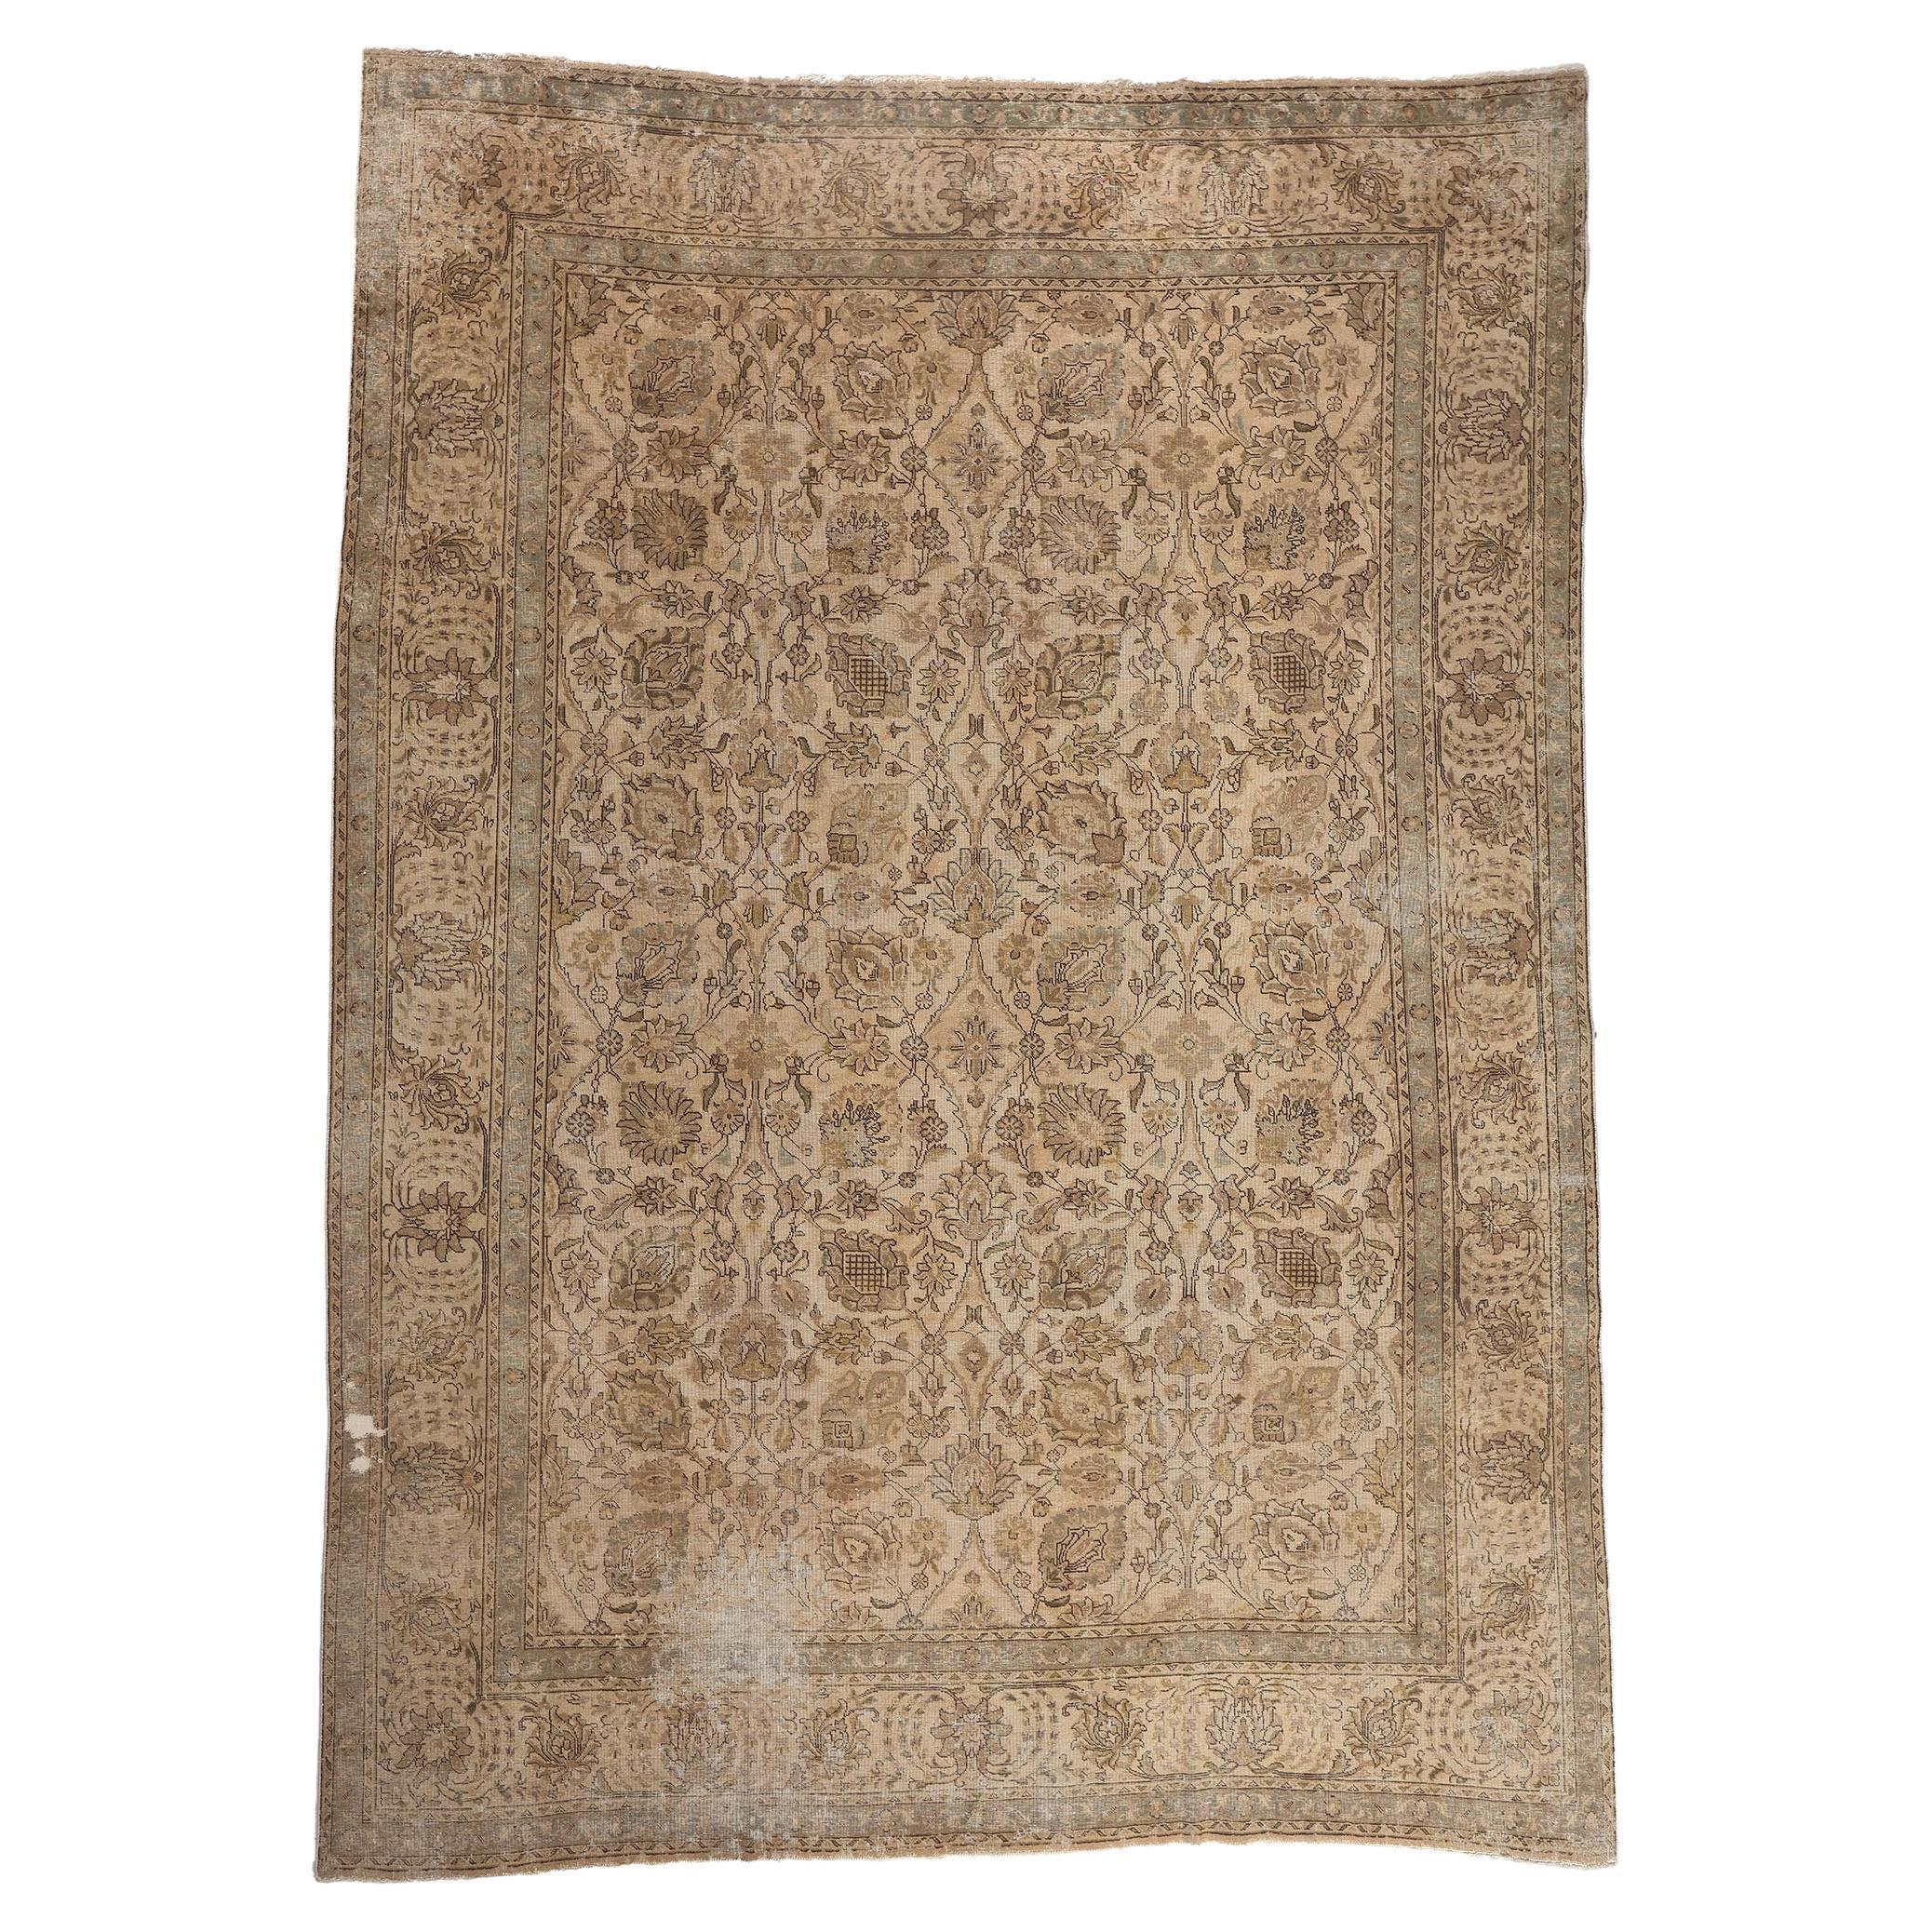 Rustic Vintage Persian Tabriz Rug Warm Neutral Earth-Tone Colors For Sale